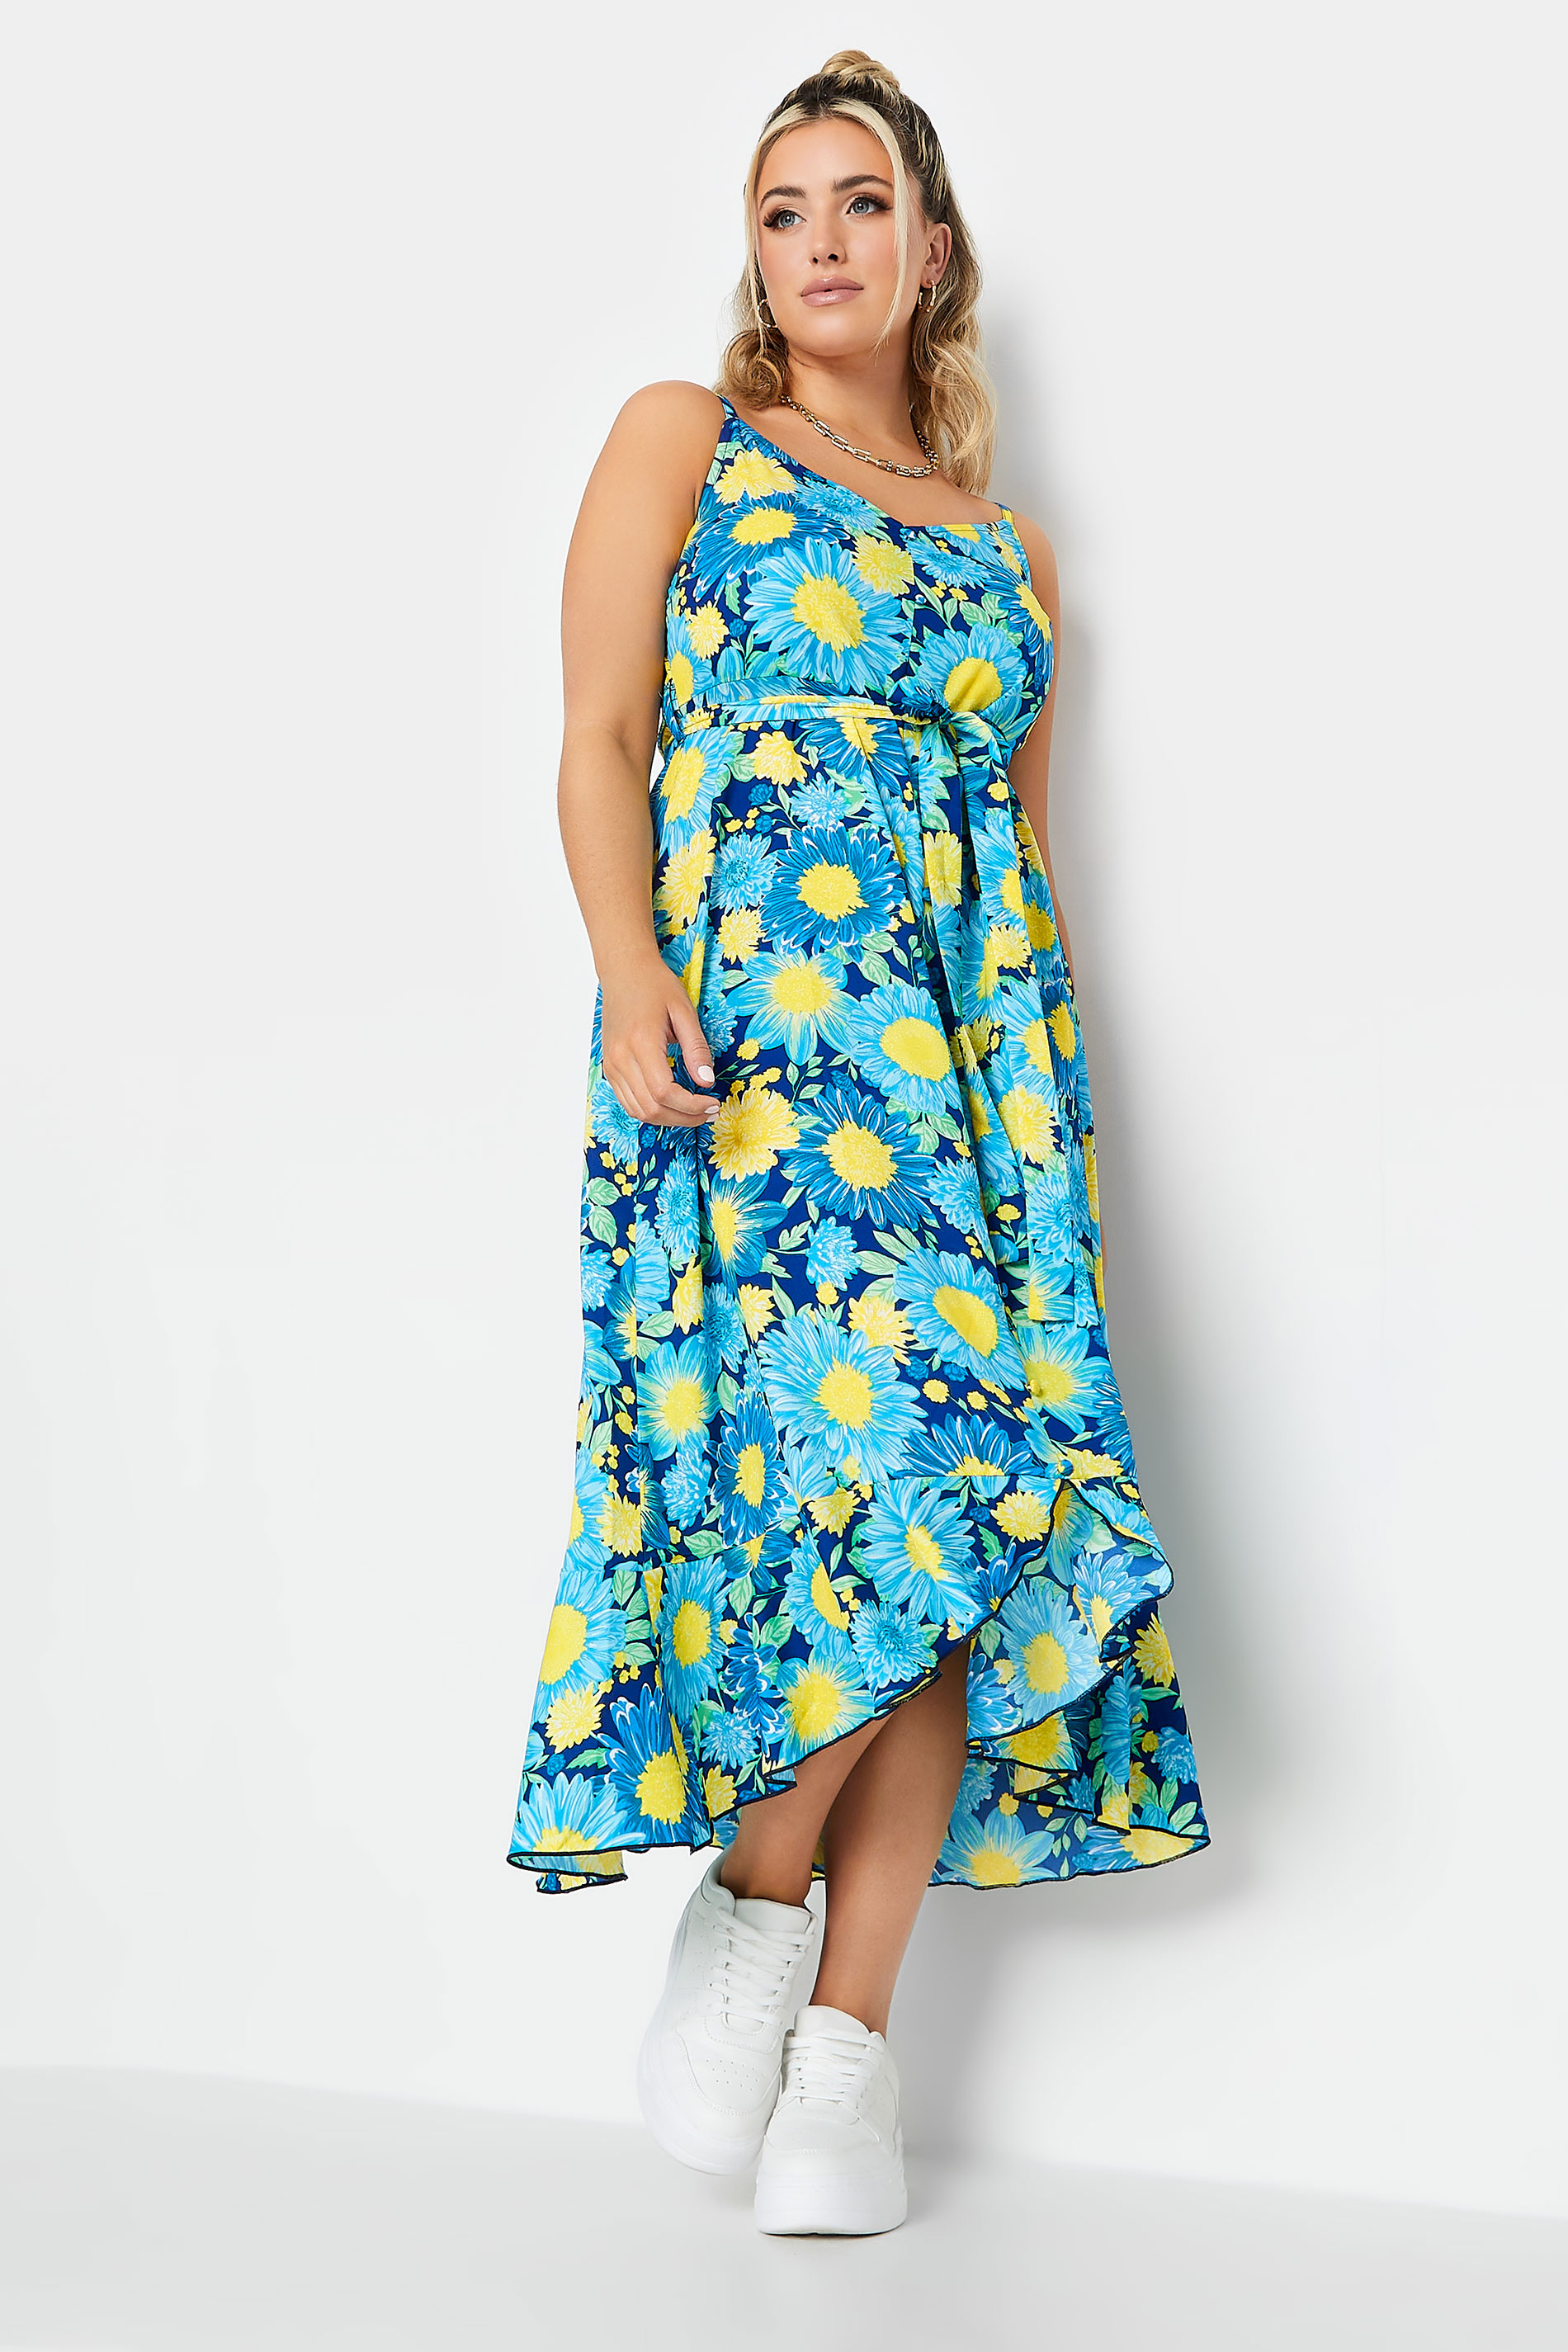 LIMITED COLLECTION Plus Size Blue Floral Frill Hem Midaxi Dress | Yours Clothing  3